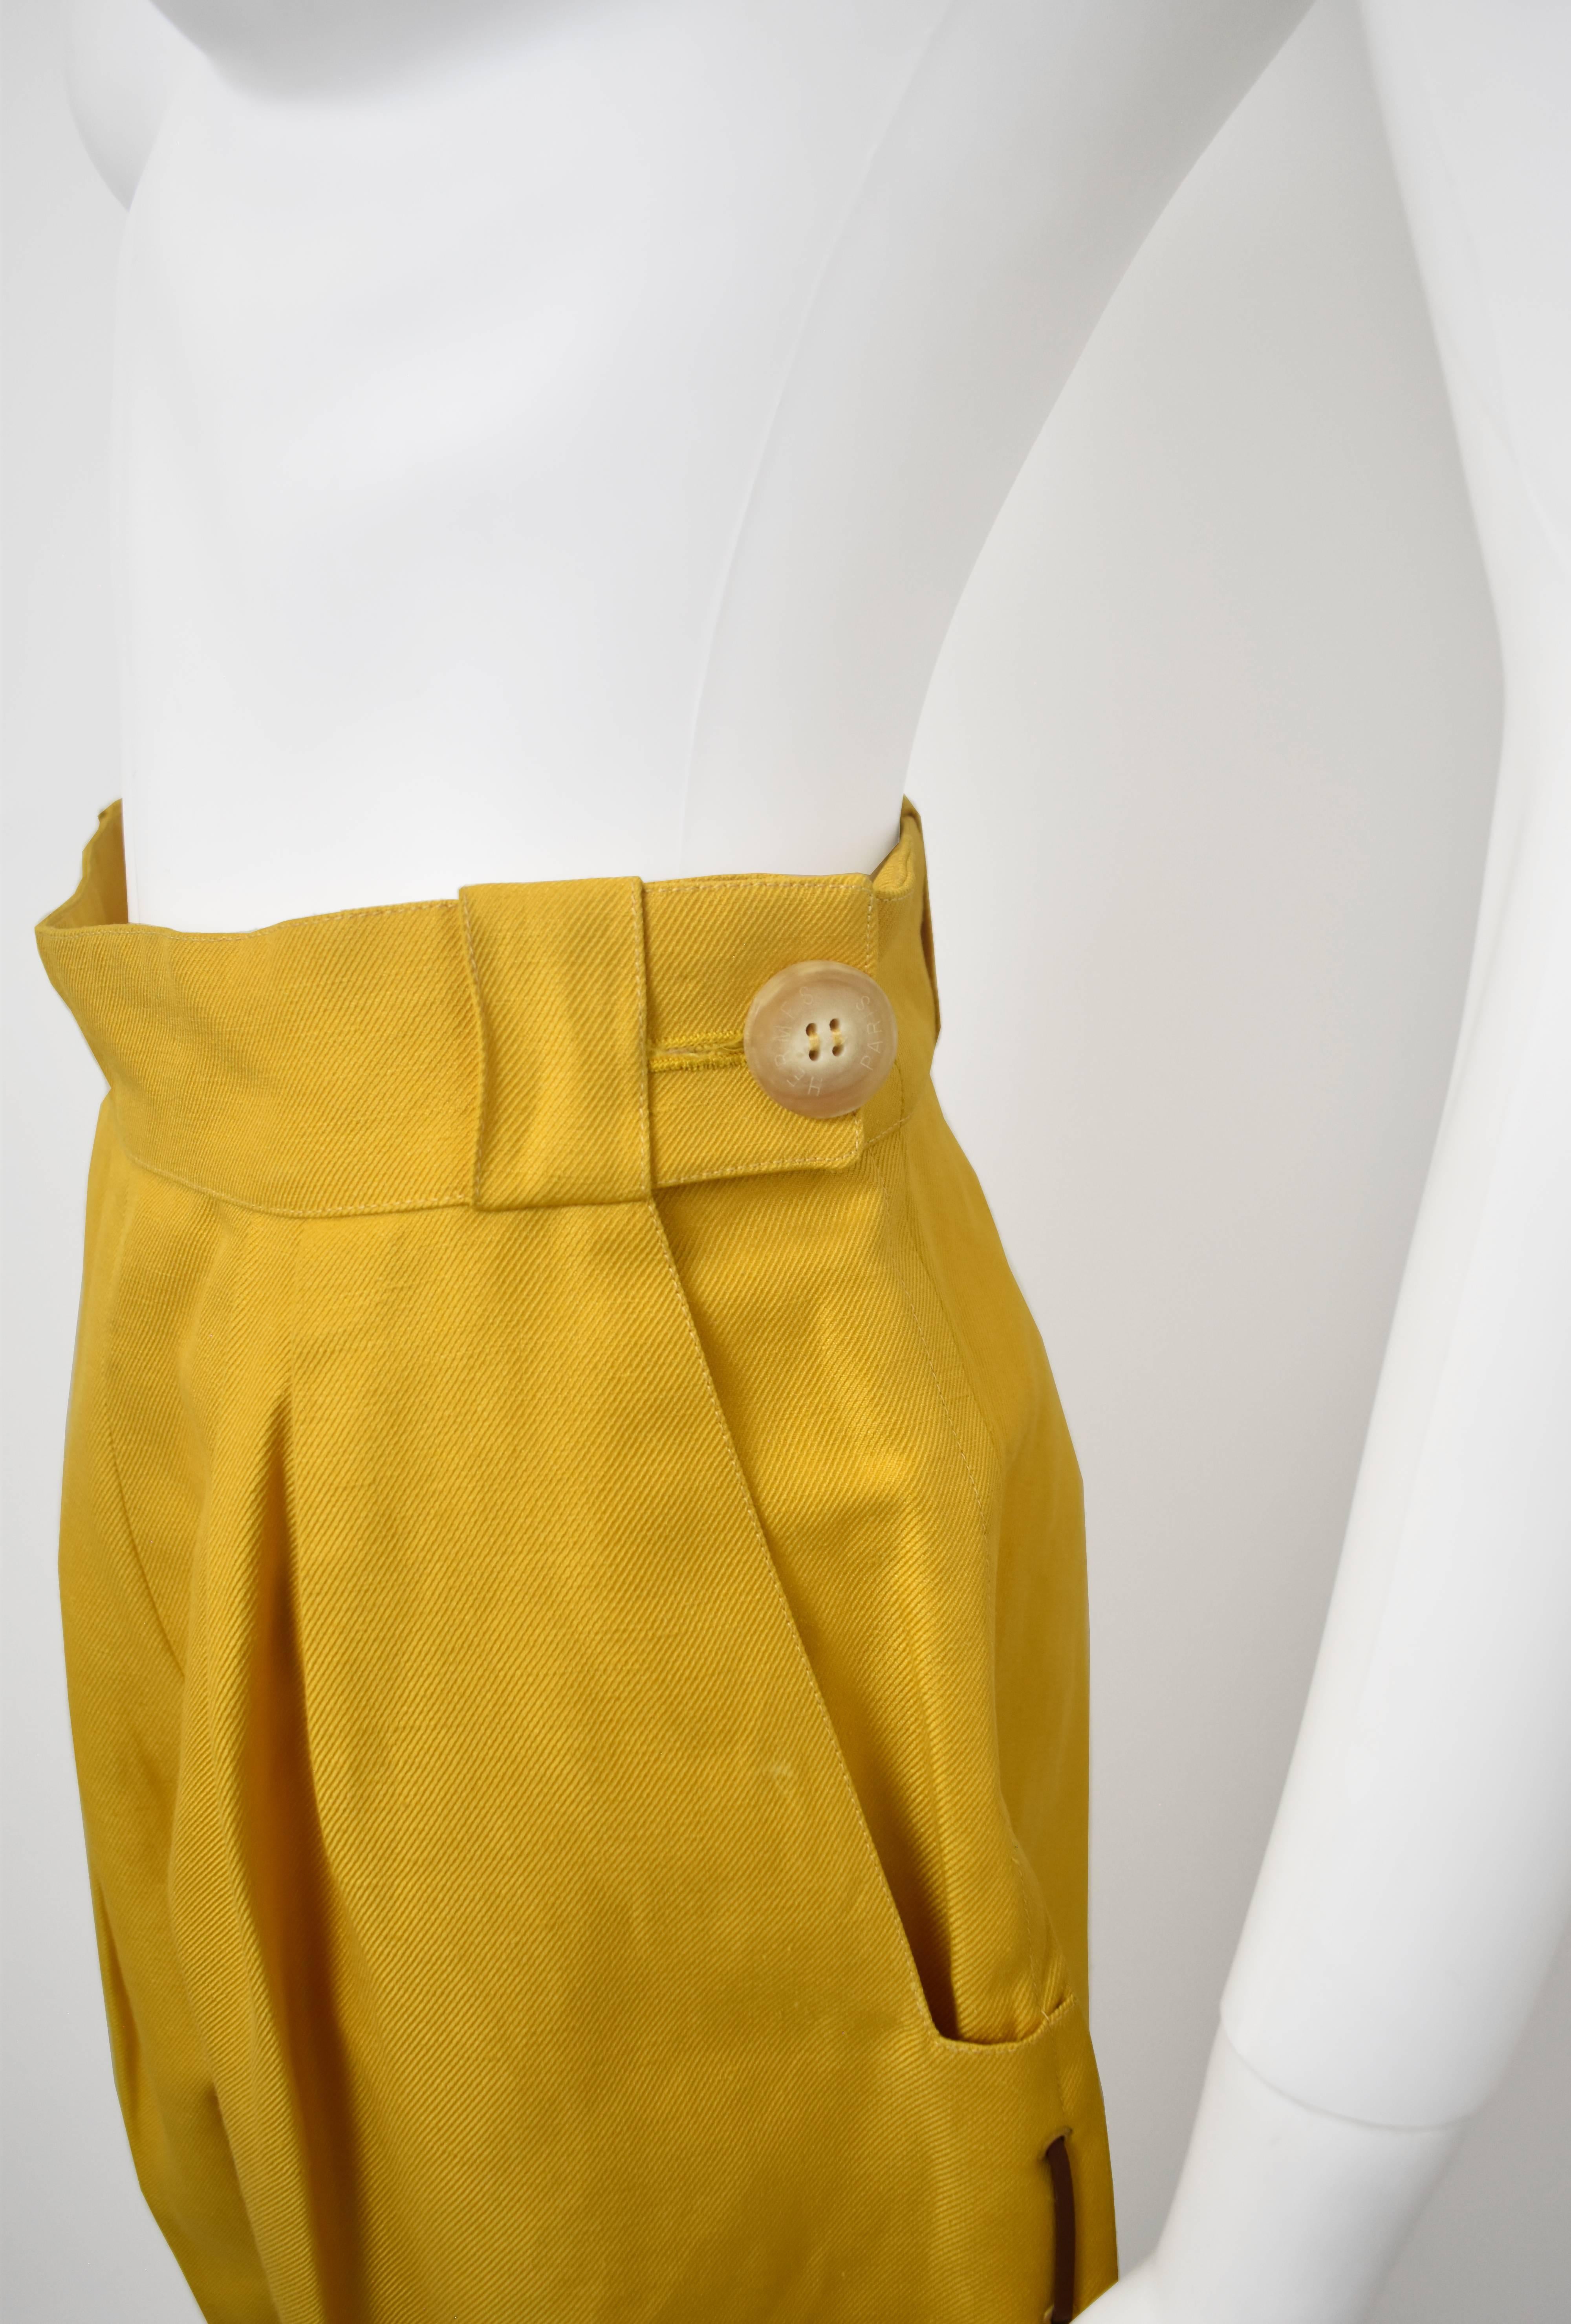 Hermes Mustard Yellow Jodhpur Trousers with Eyelet and Leather Tie Details In Good Condition For Sale In London, GB